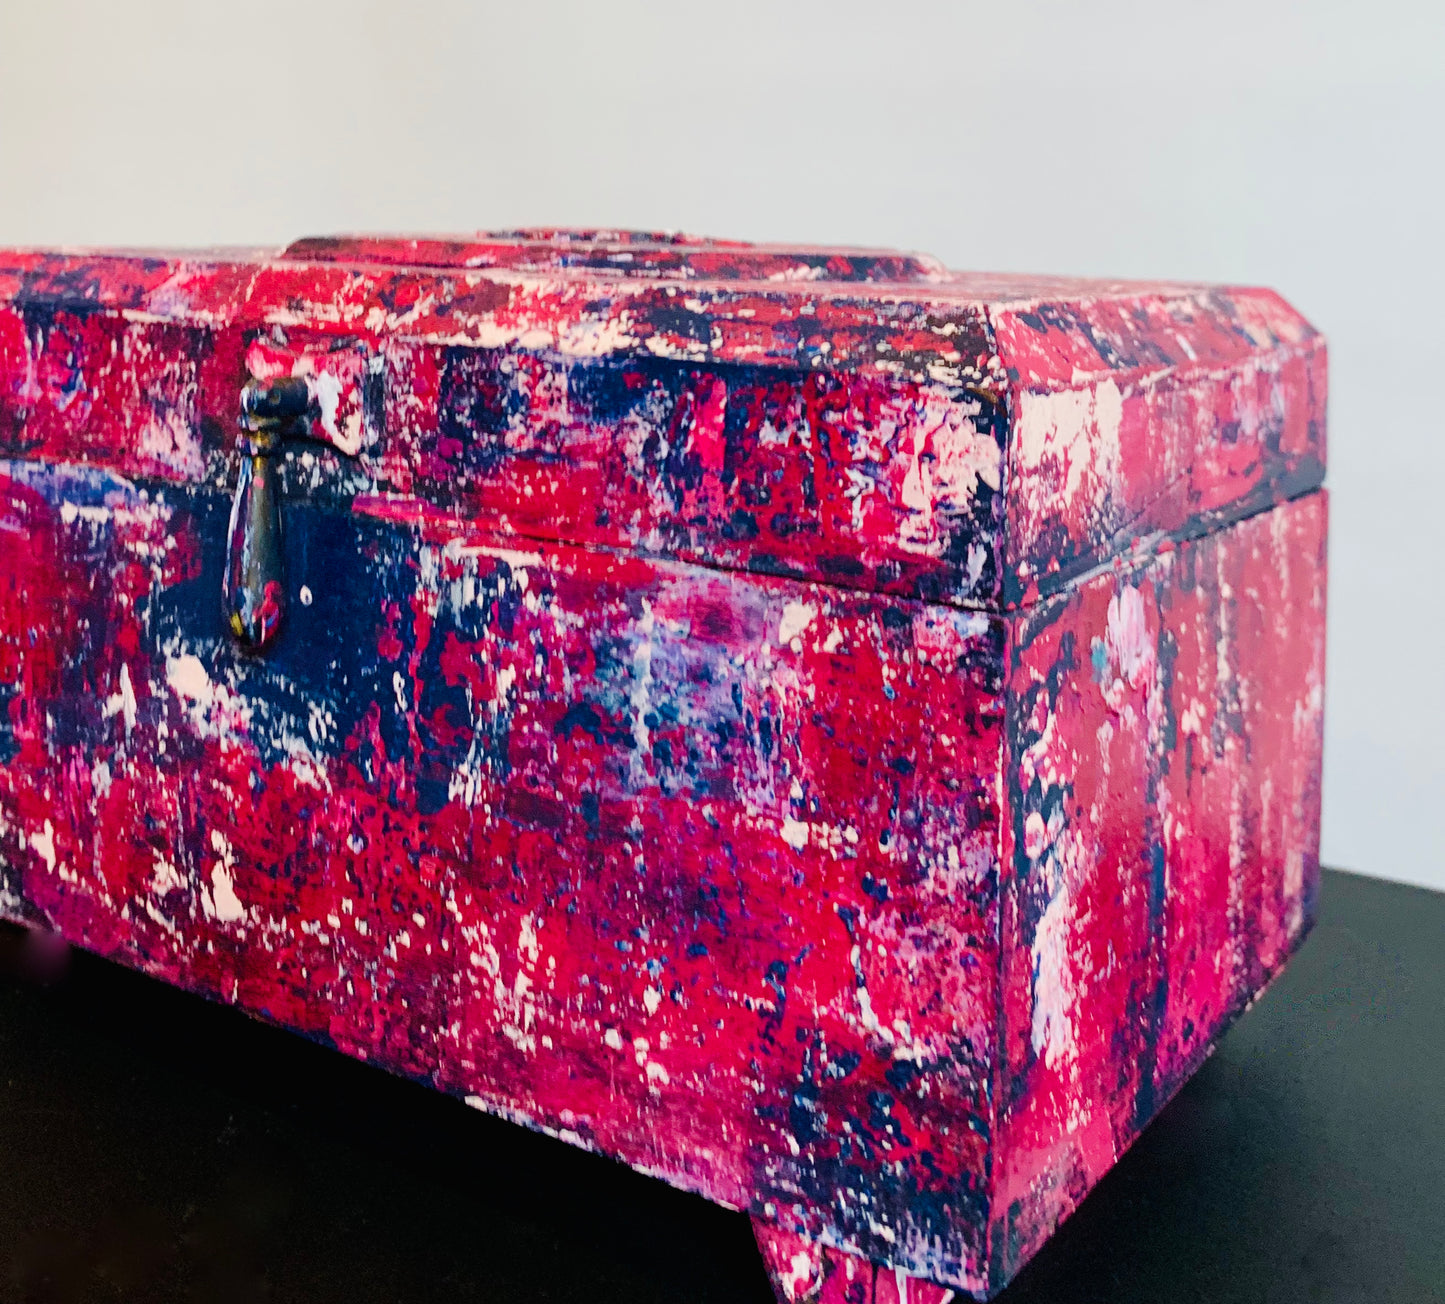 Boho Pink Red and Blue Jewelry Box